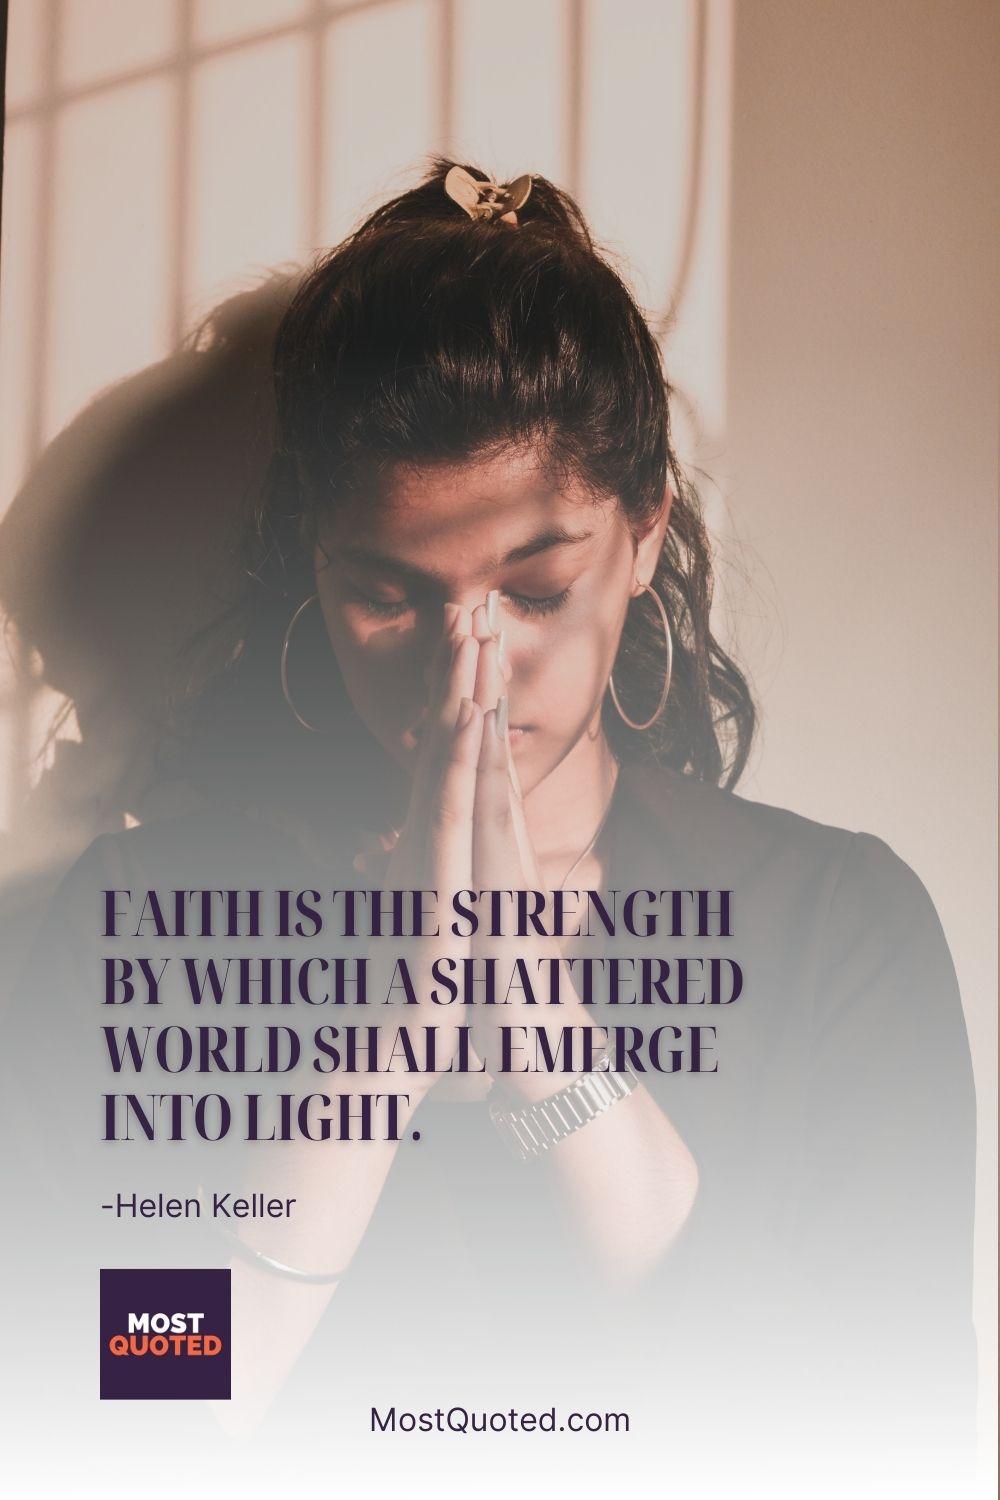 Faith is the strength by which a shattered world shall emerge into light. - Helen Keller